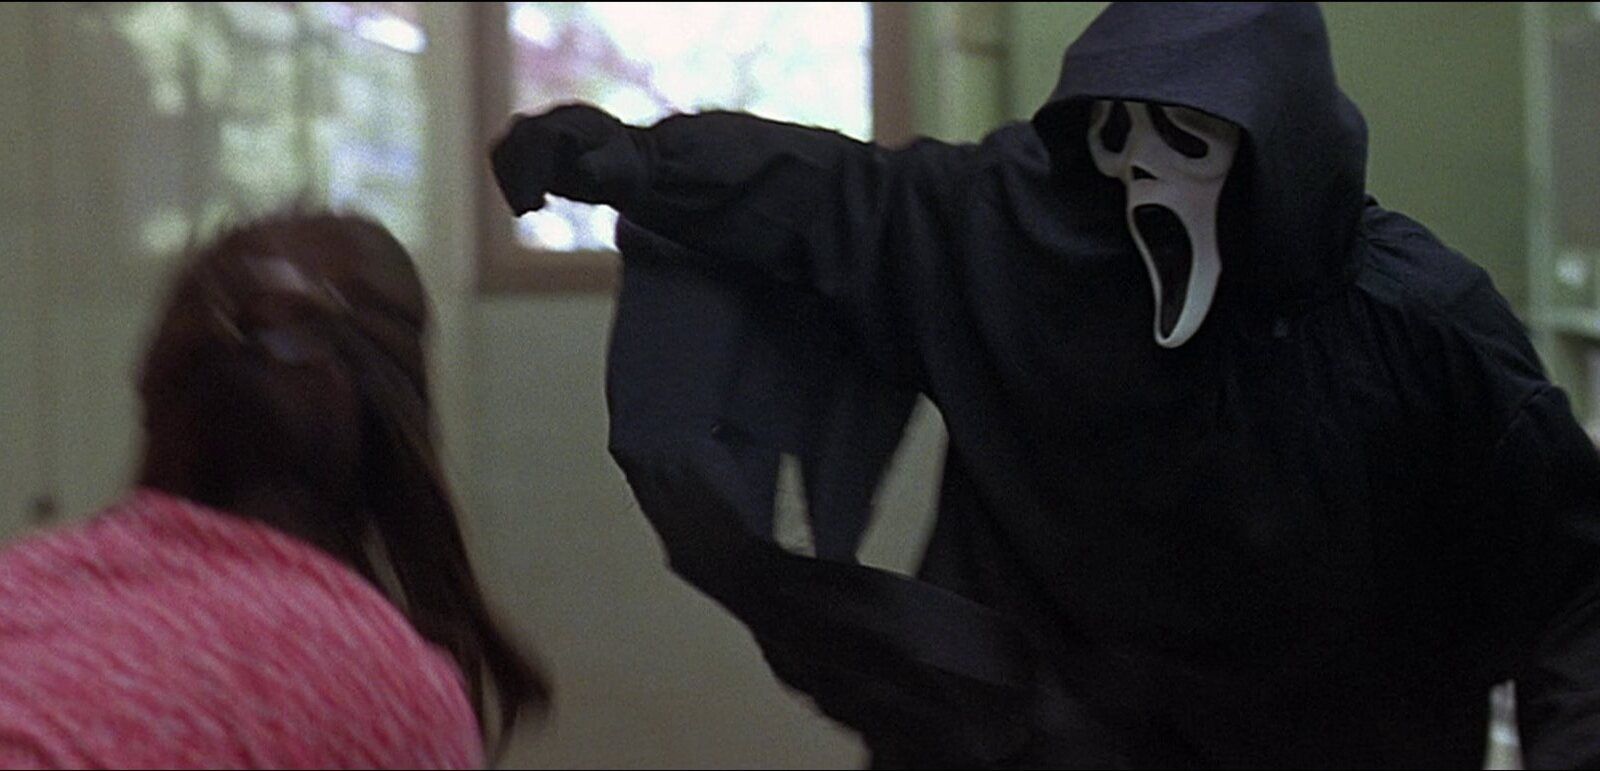 10 Best 90s Slasher Films (Ranked by Metacritic)